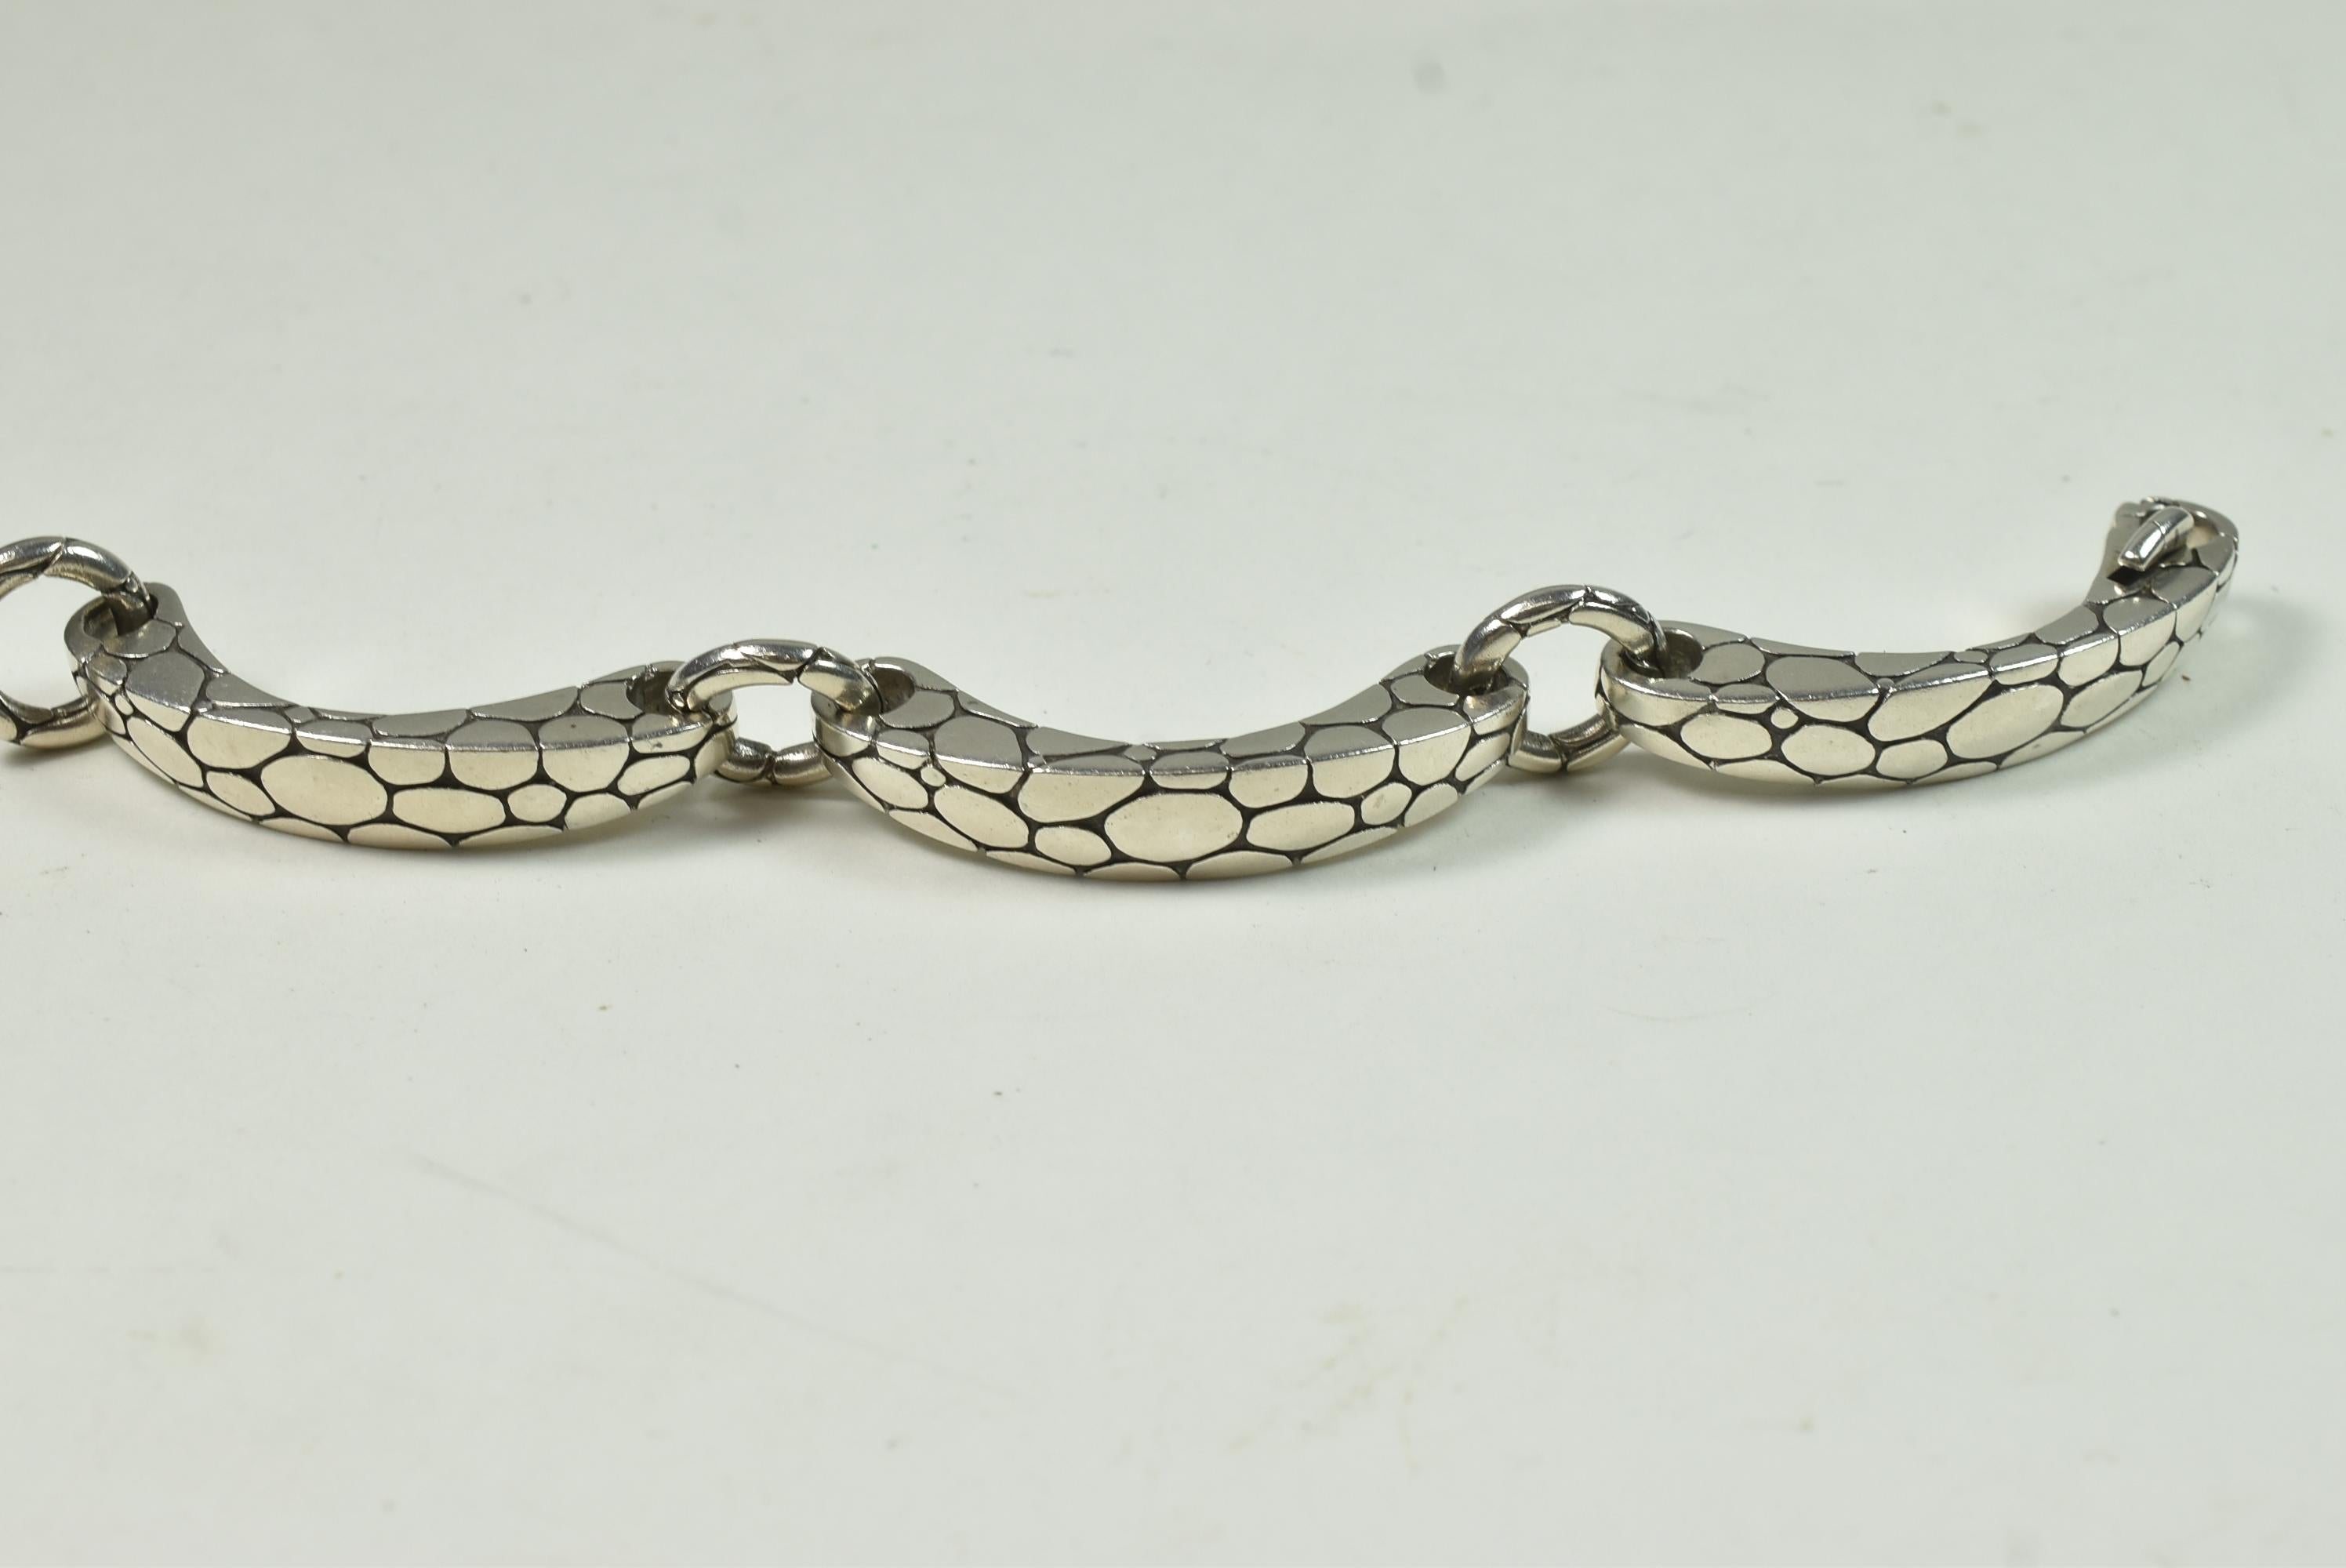 Vintage Kali Pebble Sterling Silver Bracelet by John Hardy In Good Condition For Sale In Toledo, OH